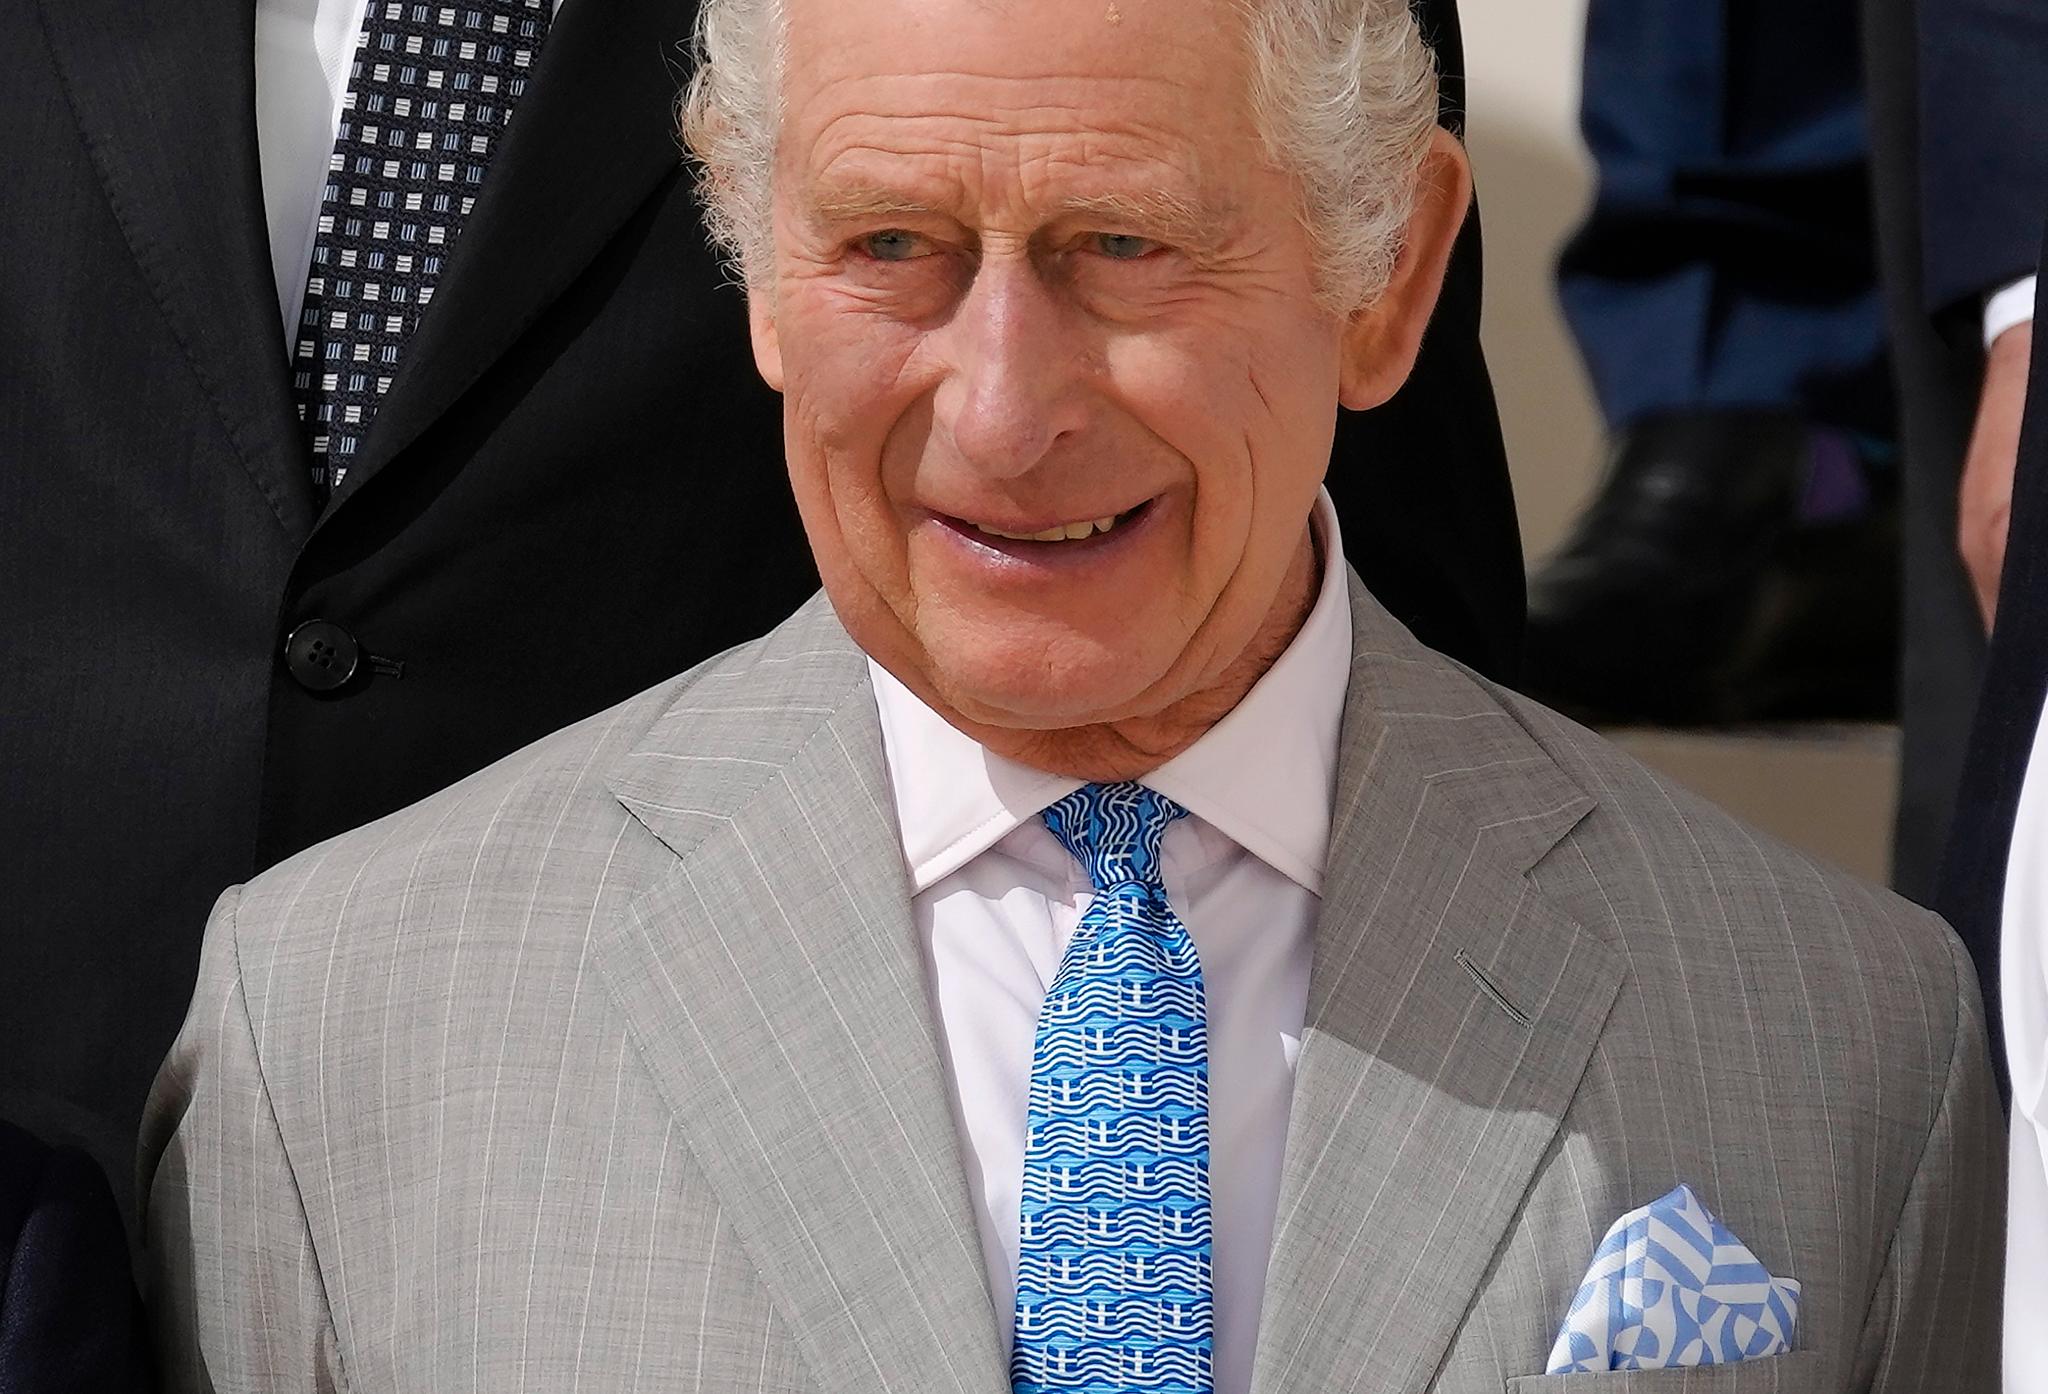 King Charles’ “Greek tie” creates a necklace